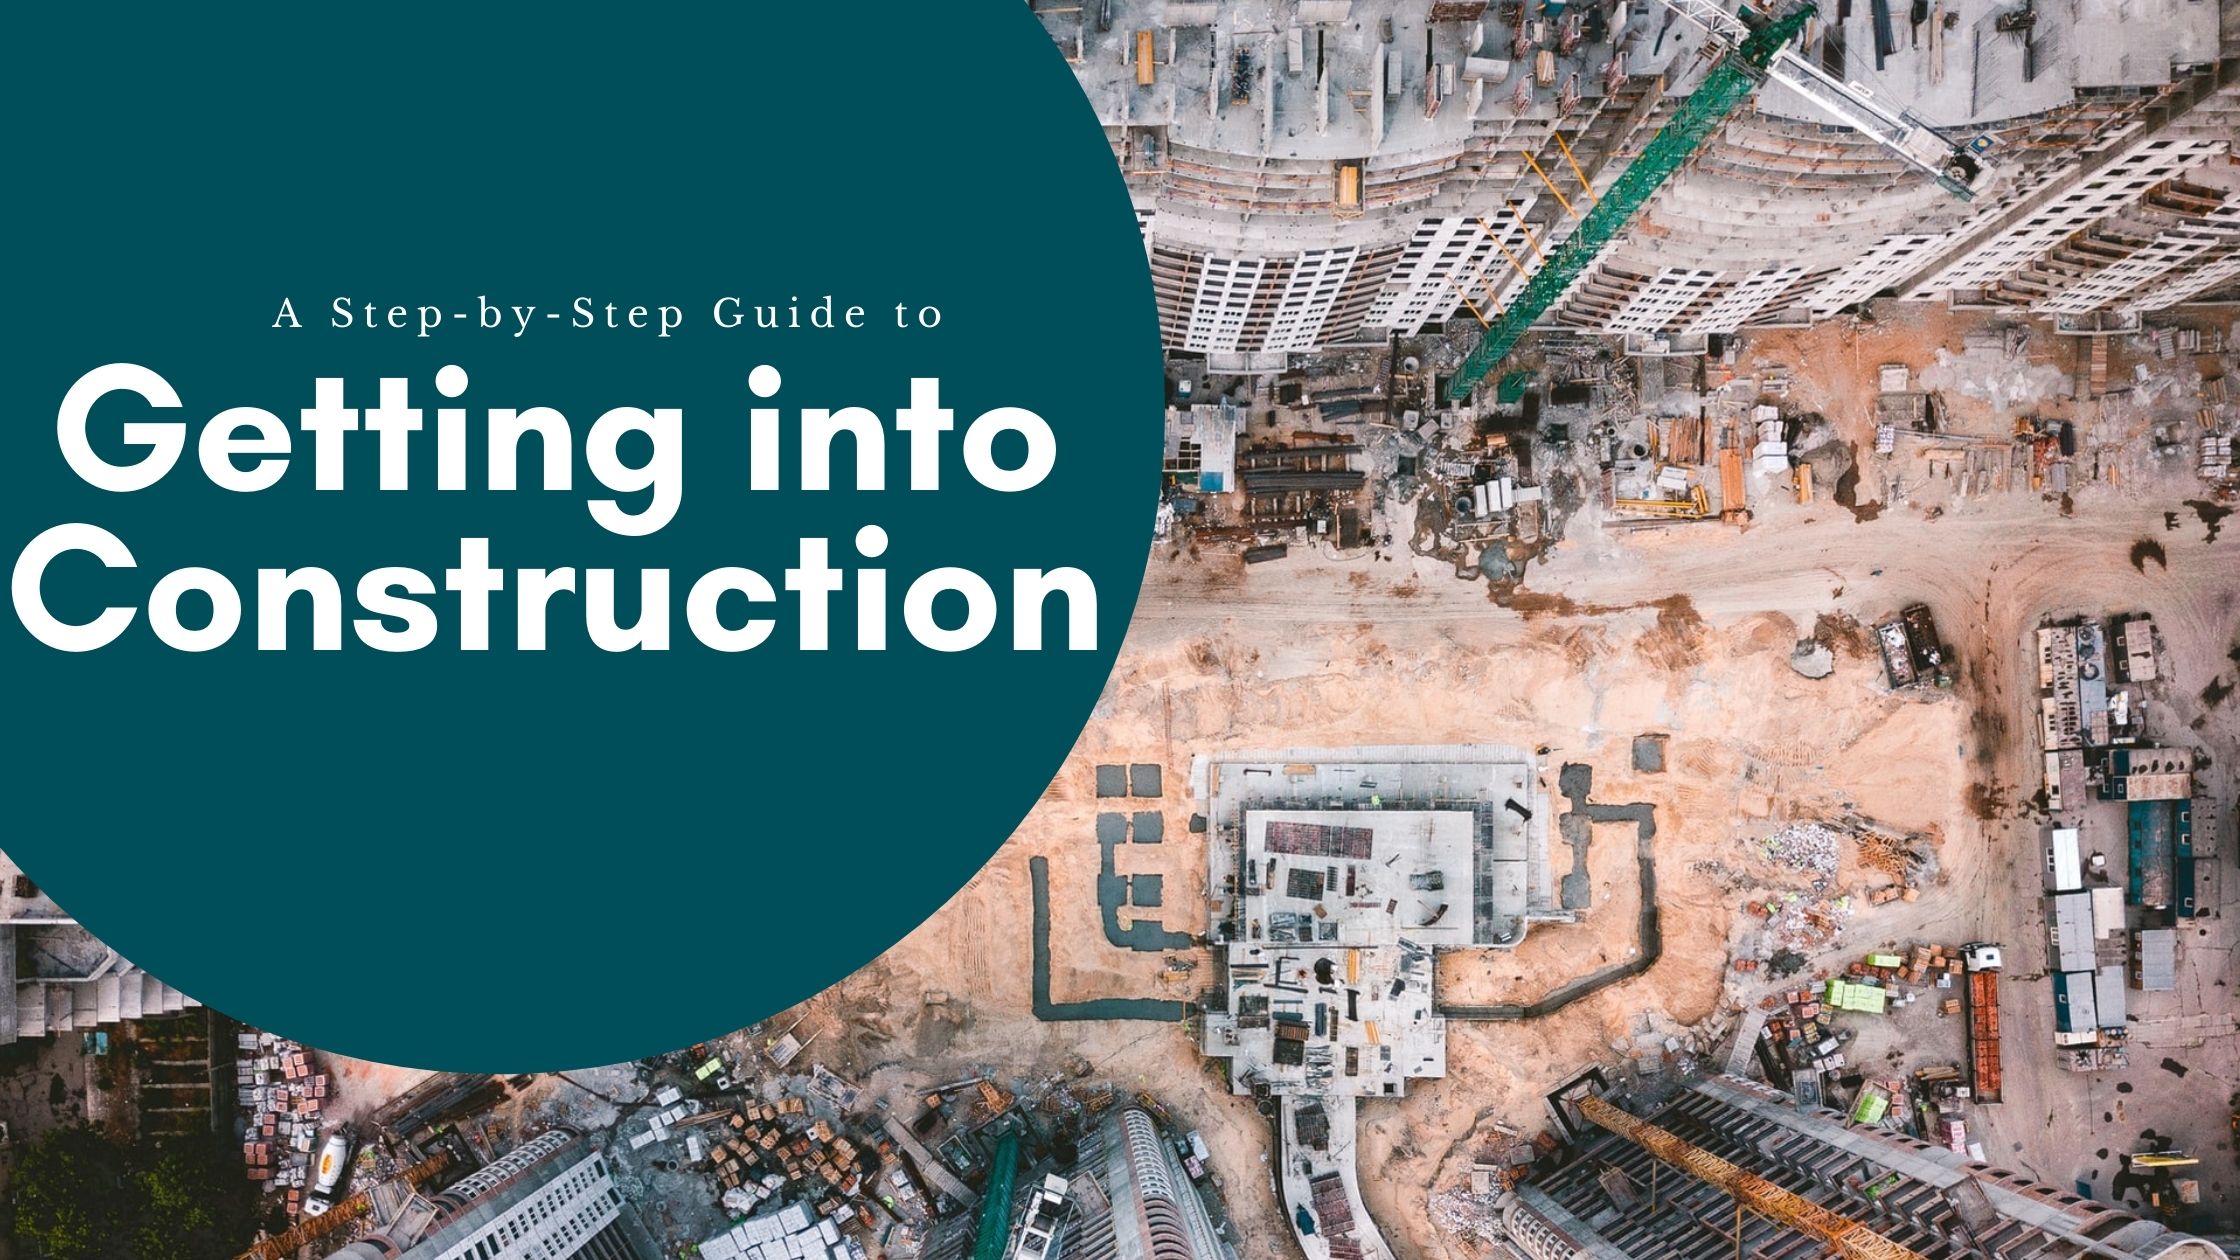 How to get into construction